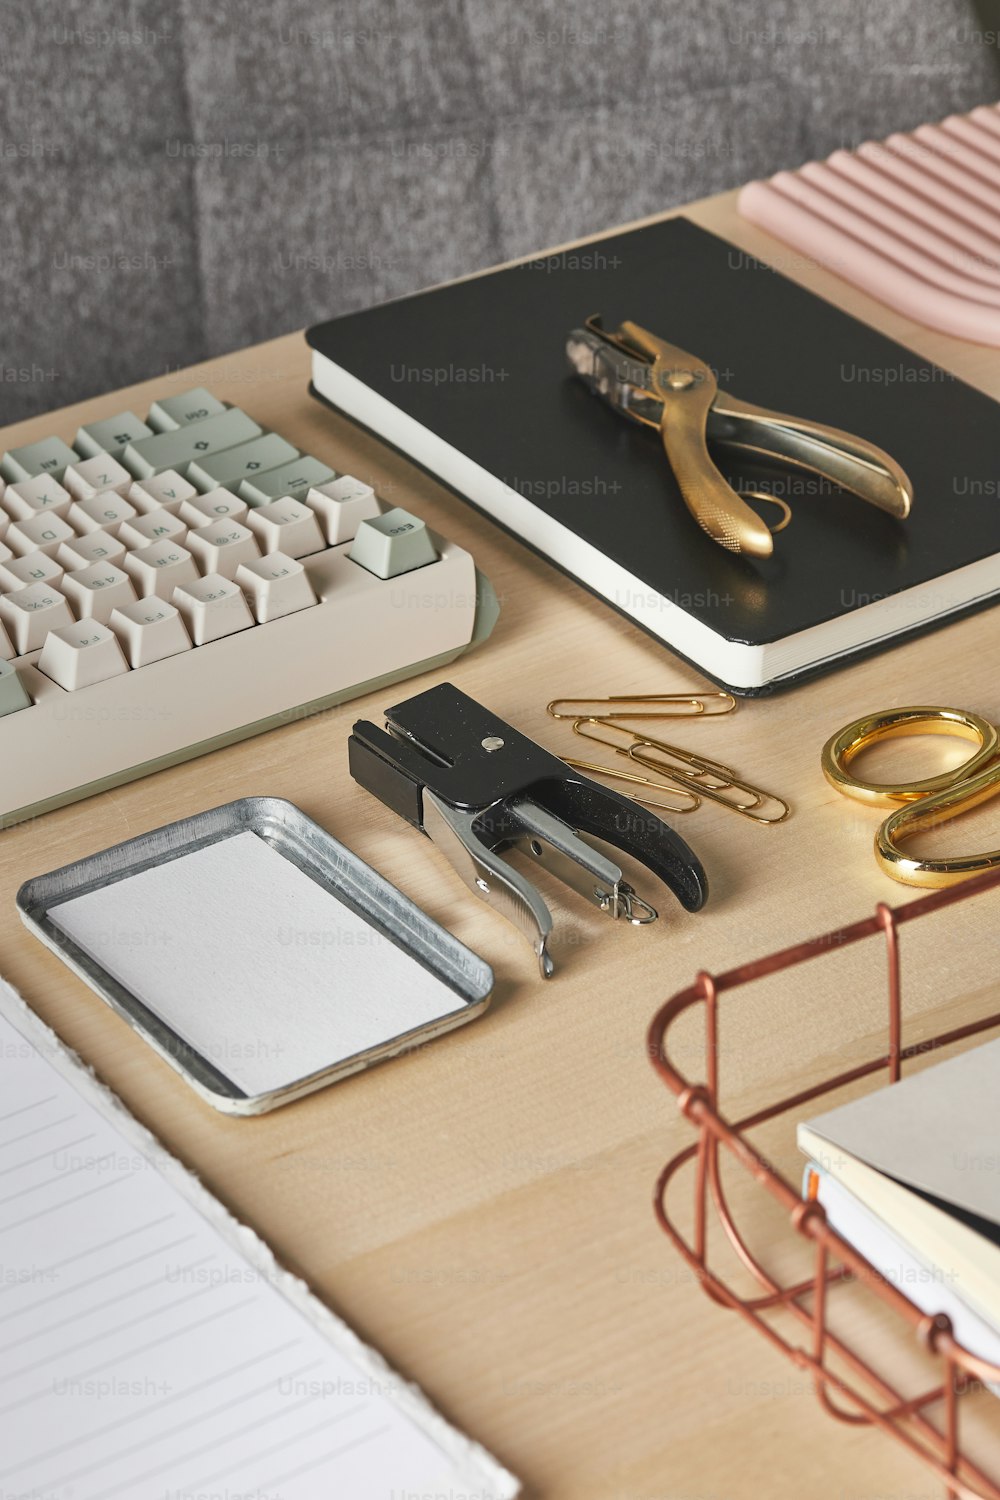 a desk with a keyboard, binder, scissors, and other office supplies